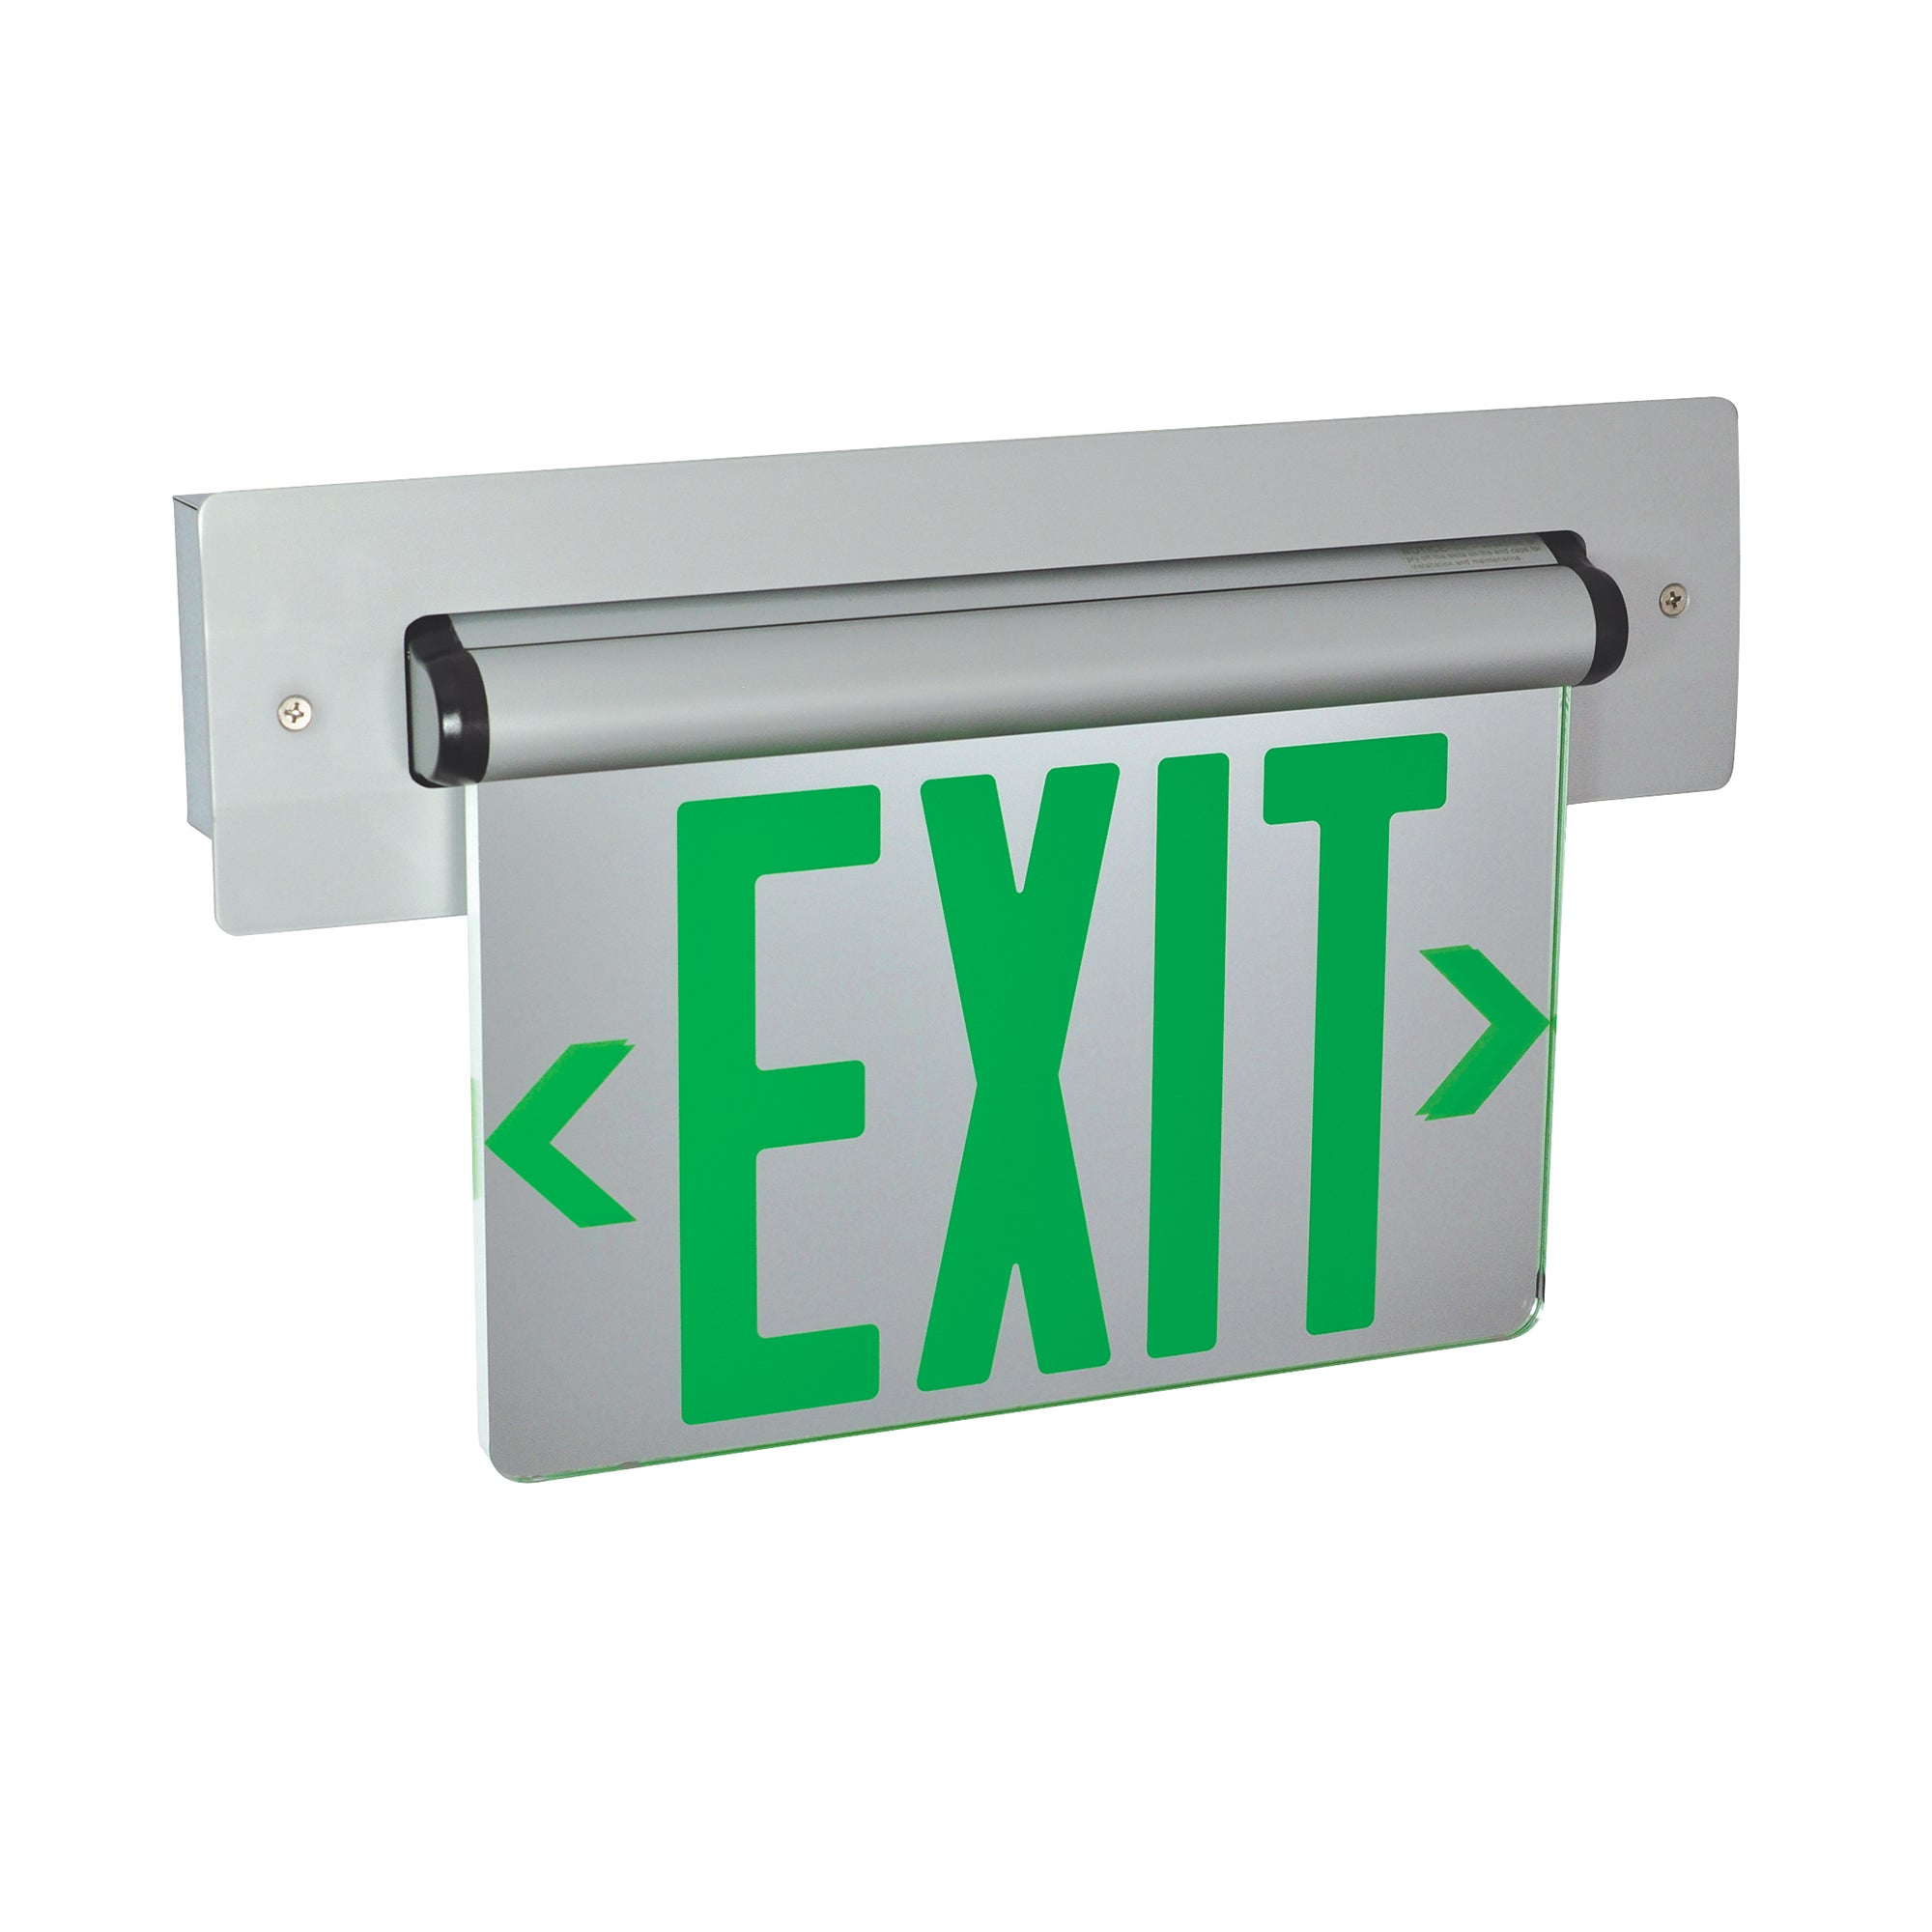 Nora Lighting NX-814-LEDG2MA - Exit / Emergency - Recessed Adjustable LED Edge-Lit Exit Sign, 2 Circuit, 6 Inch Green Letters, Double Face / Mirrored Acrylic, Aluminum Housing